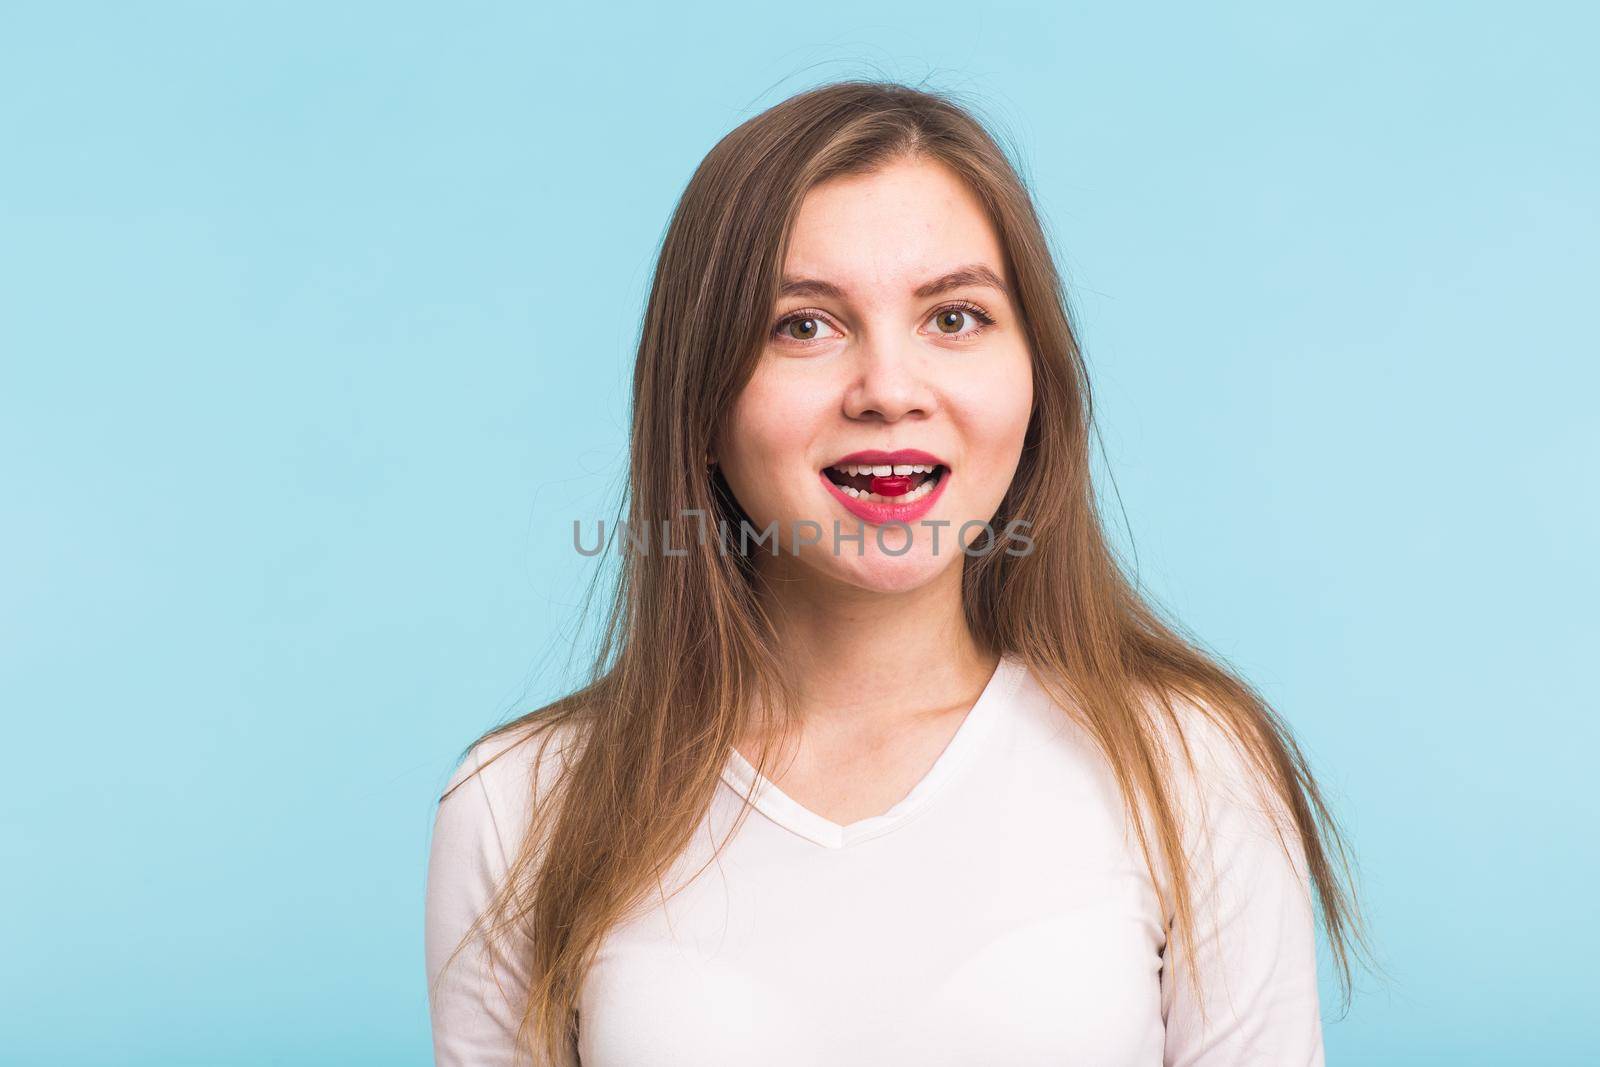 Red tablet in the mouth of the woman on blue background.